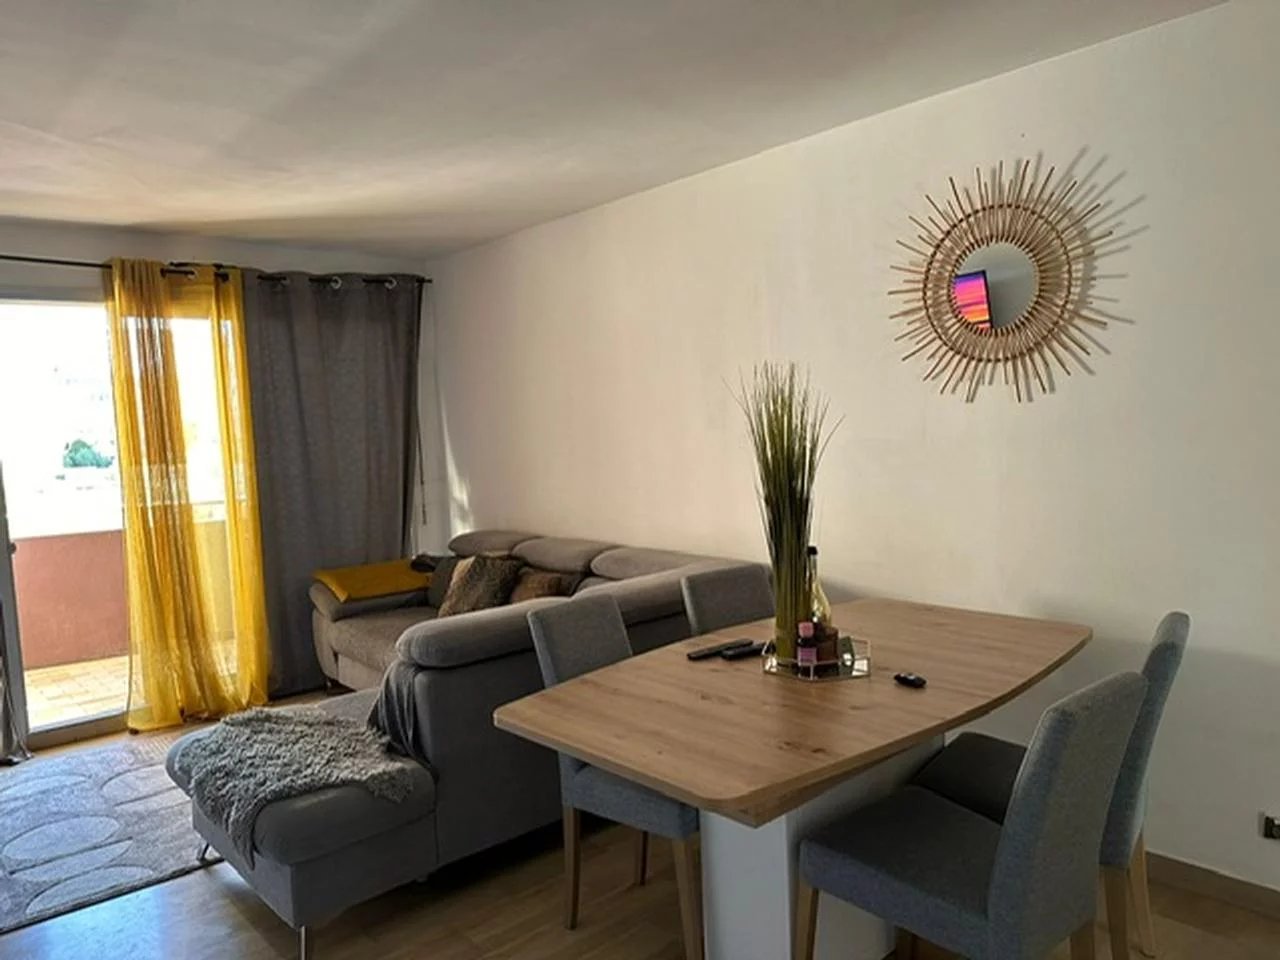 Appartement  3 Rooms 56m2  for sale   170 000 €